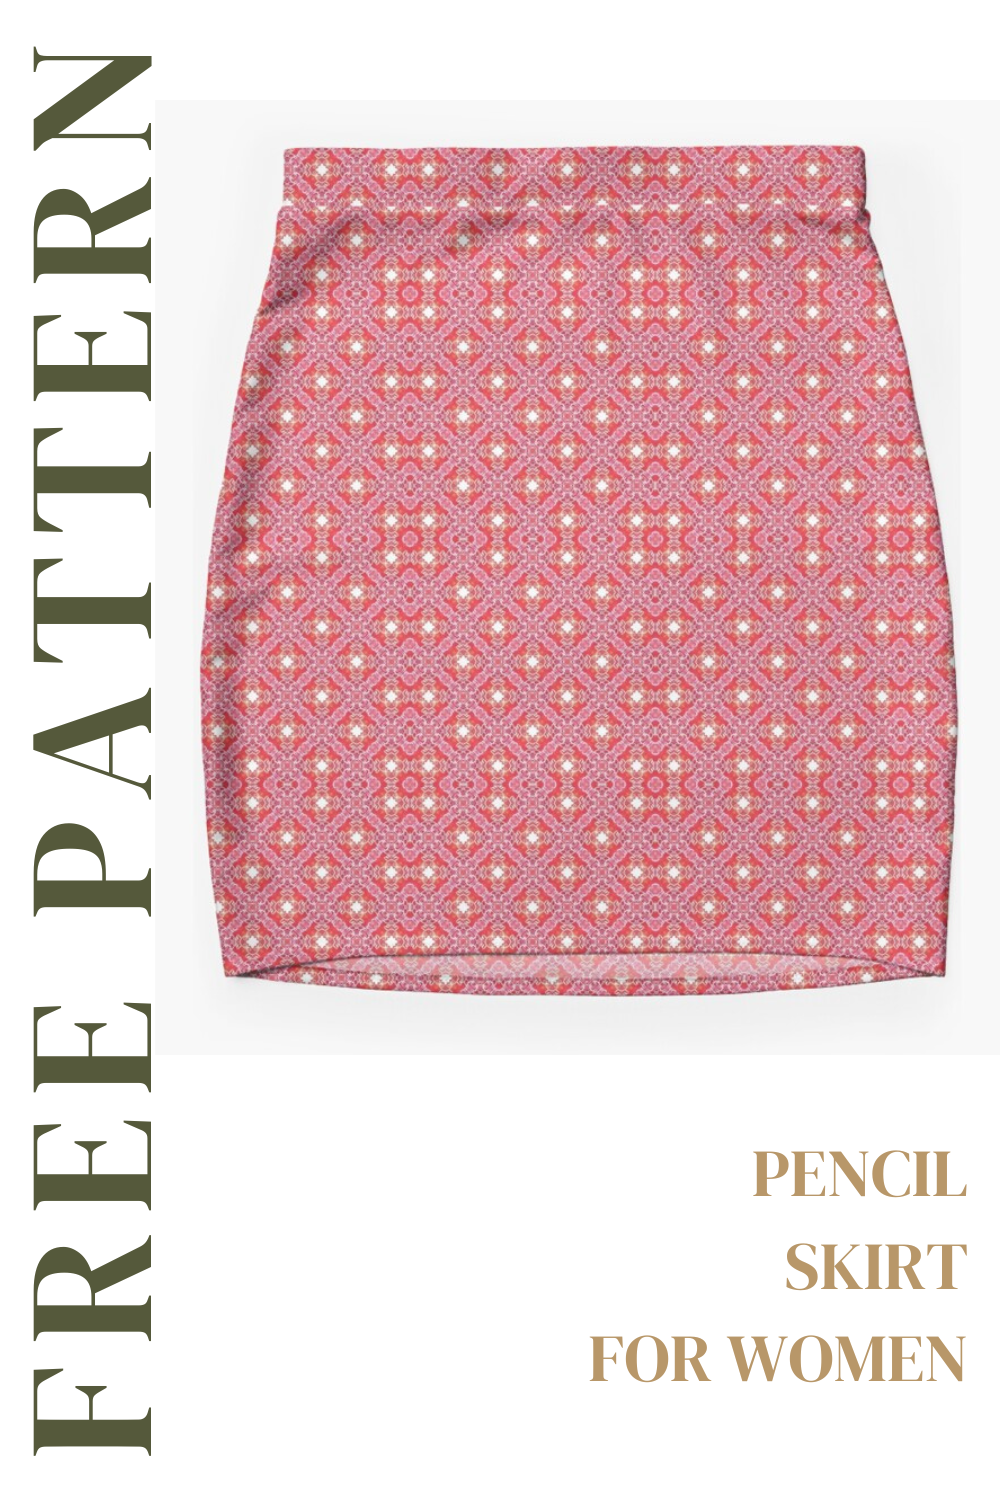 FREE PATTERN: Pencil skirt pattern - On the Cutting Floor: Printable ...